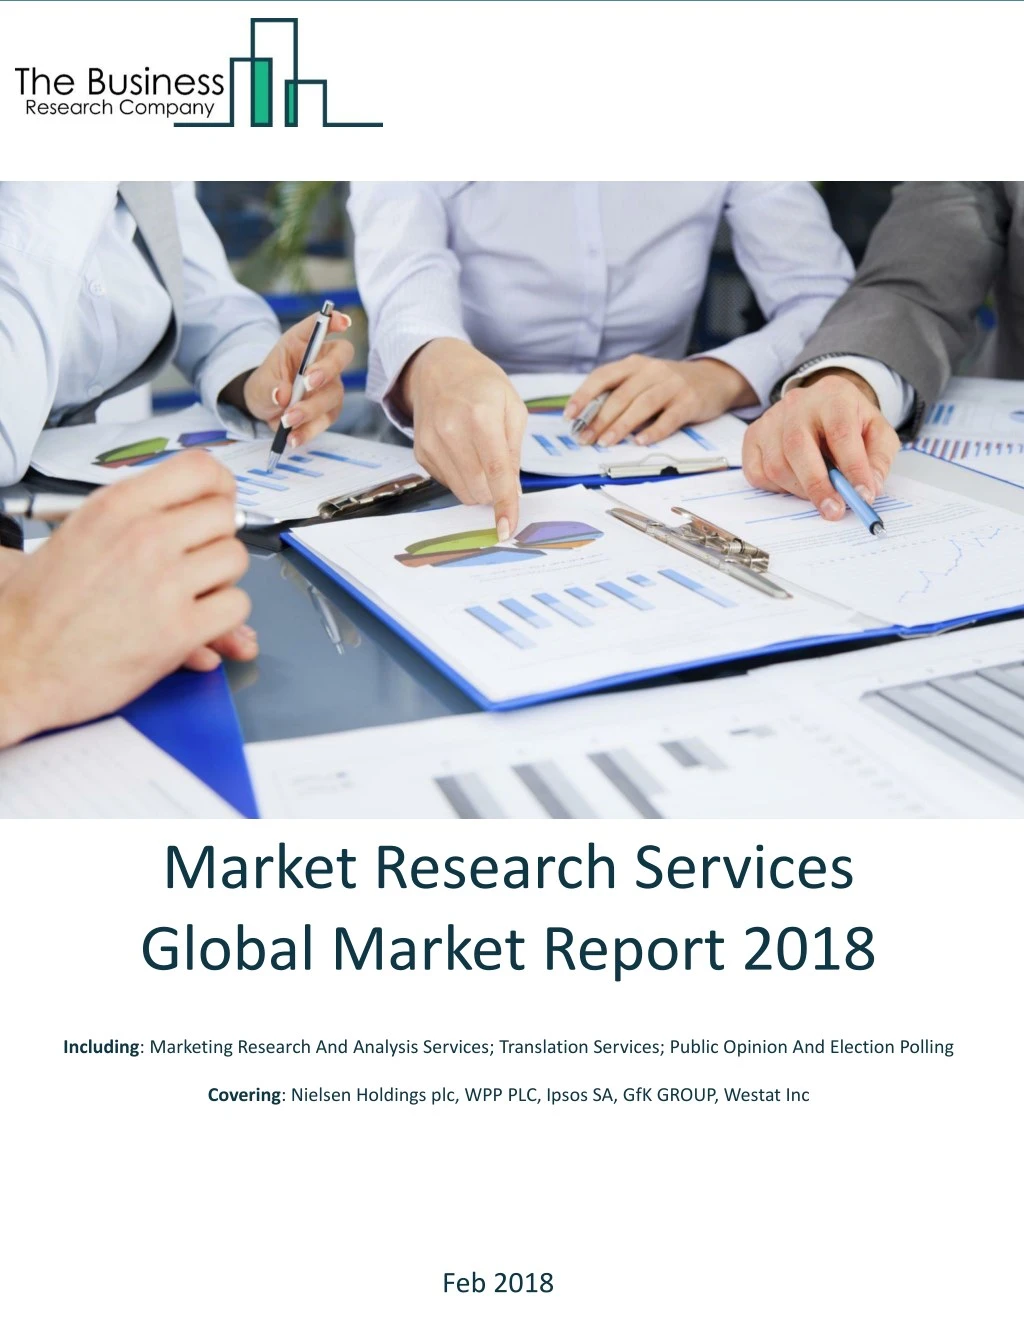 market research services global market report 2018